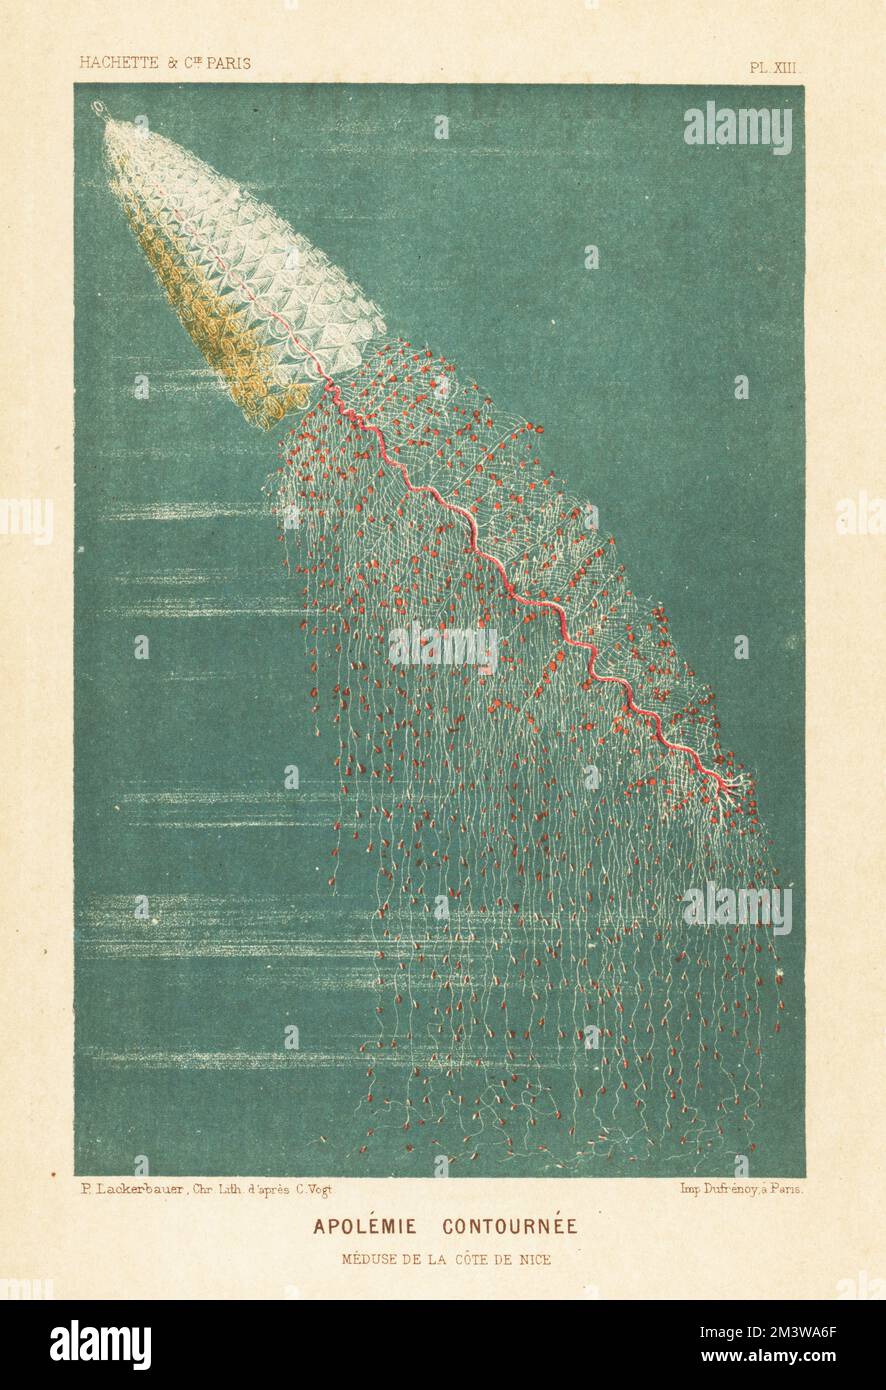 Siphonophore or string jellyfish, Apolemia contorta, from the Mediterranean coast off Nice. Apolemie contournee. Zooid, or floating colony of polyps and medusoids. Meduse de la cote de Nice. Chromolithograph by Pierre Lackerbauer after Carl Vogt from Alfred Fredol’s Le Monde de la Mer, the World of the Sea, edited by Olivier Fredol, Librairie Hachette et. Cie., Paris, 1881. Alfred Fredol was the pseudonym of French zoologist and botanist Alfred Moquin-Tandon, 1804-1863. Stock Photo